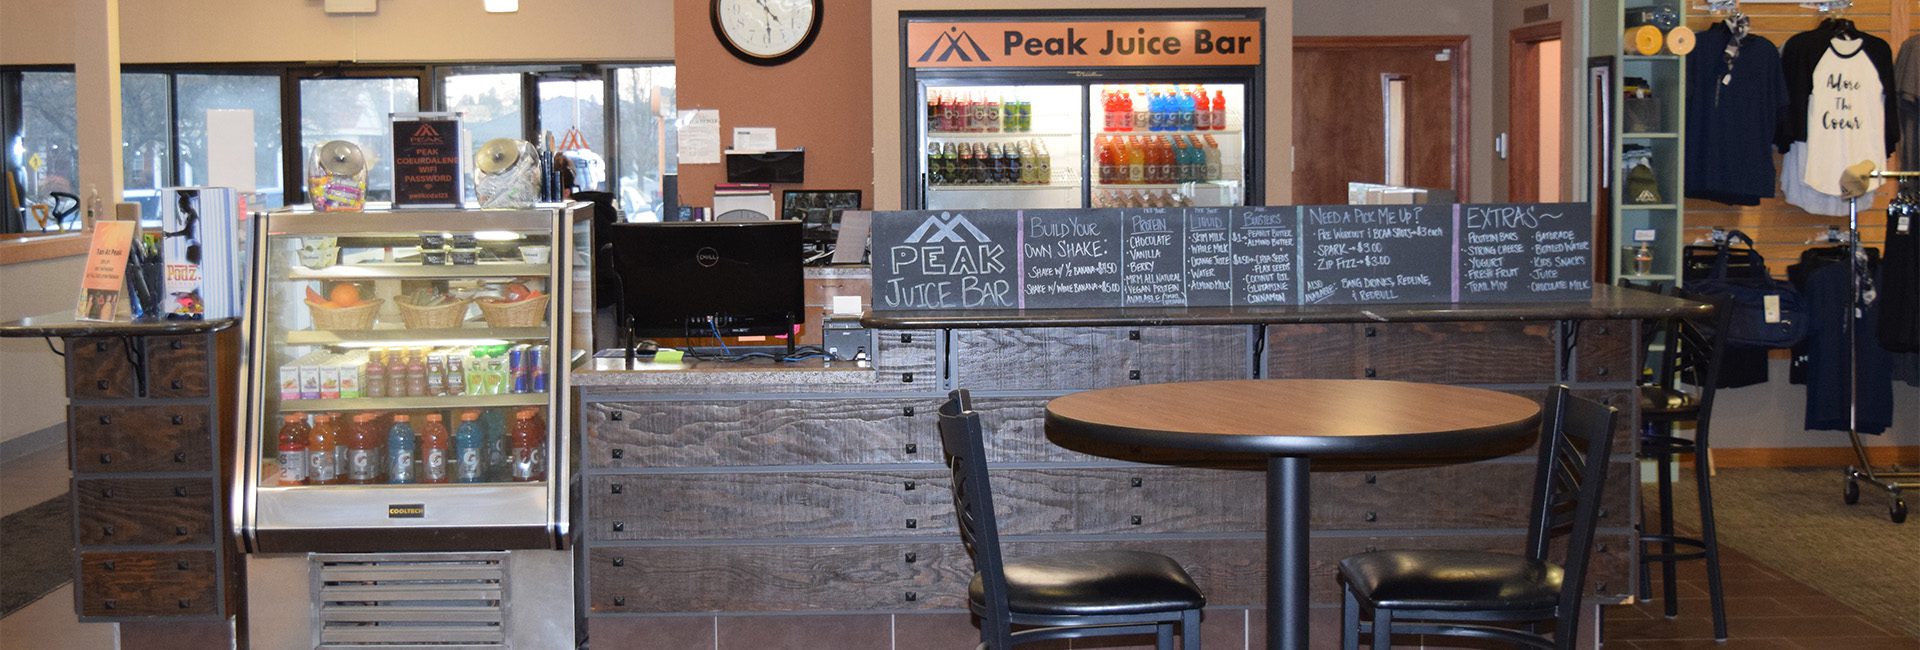 Gyms With Juice Bar Refreshments Near Me Coeur Dalene